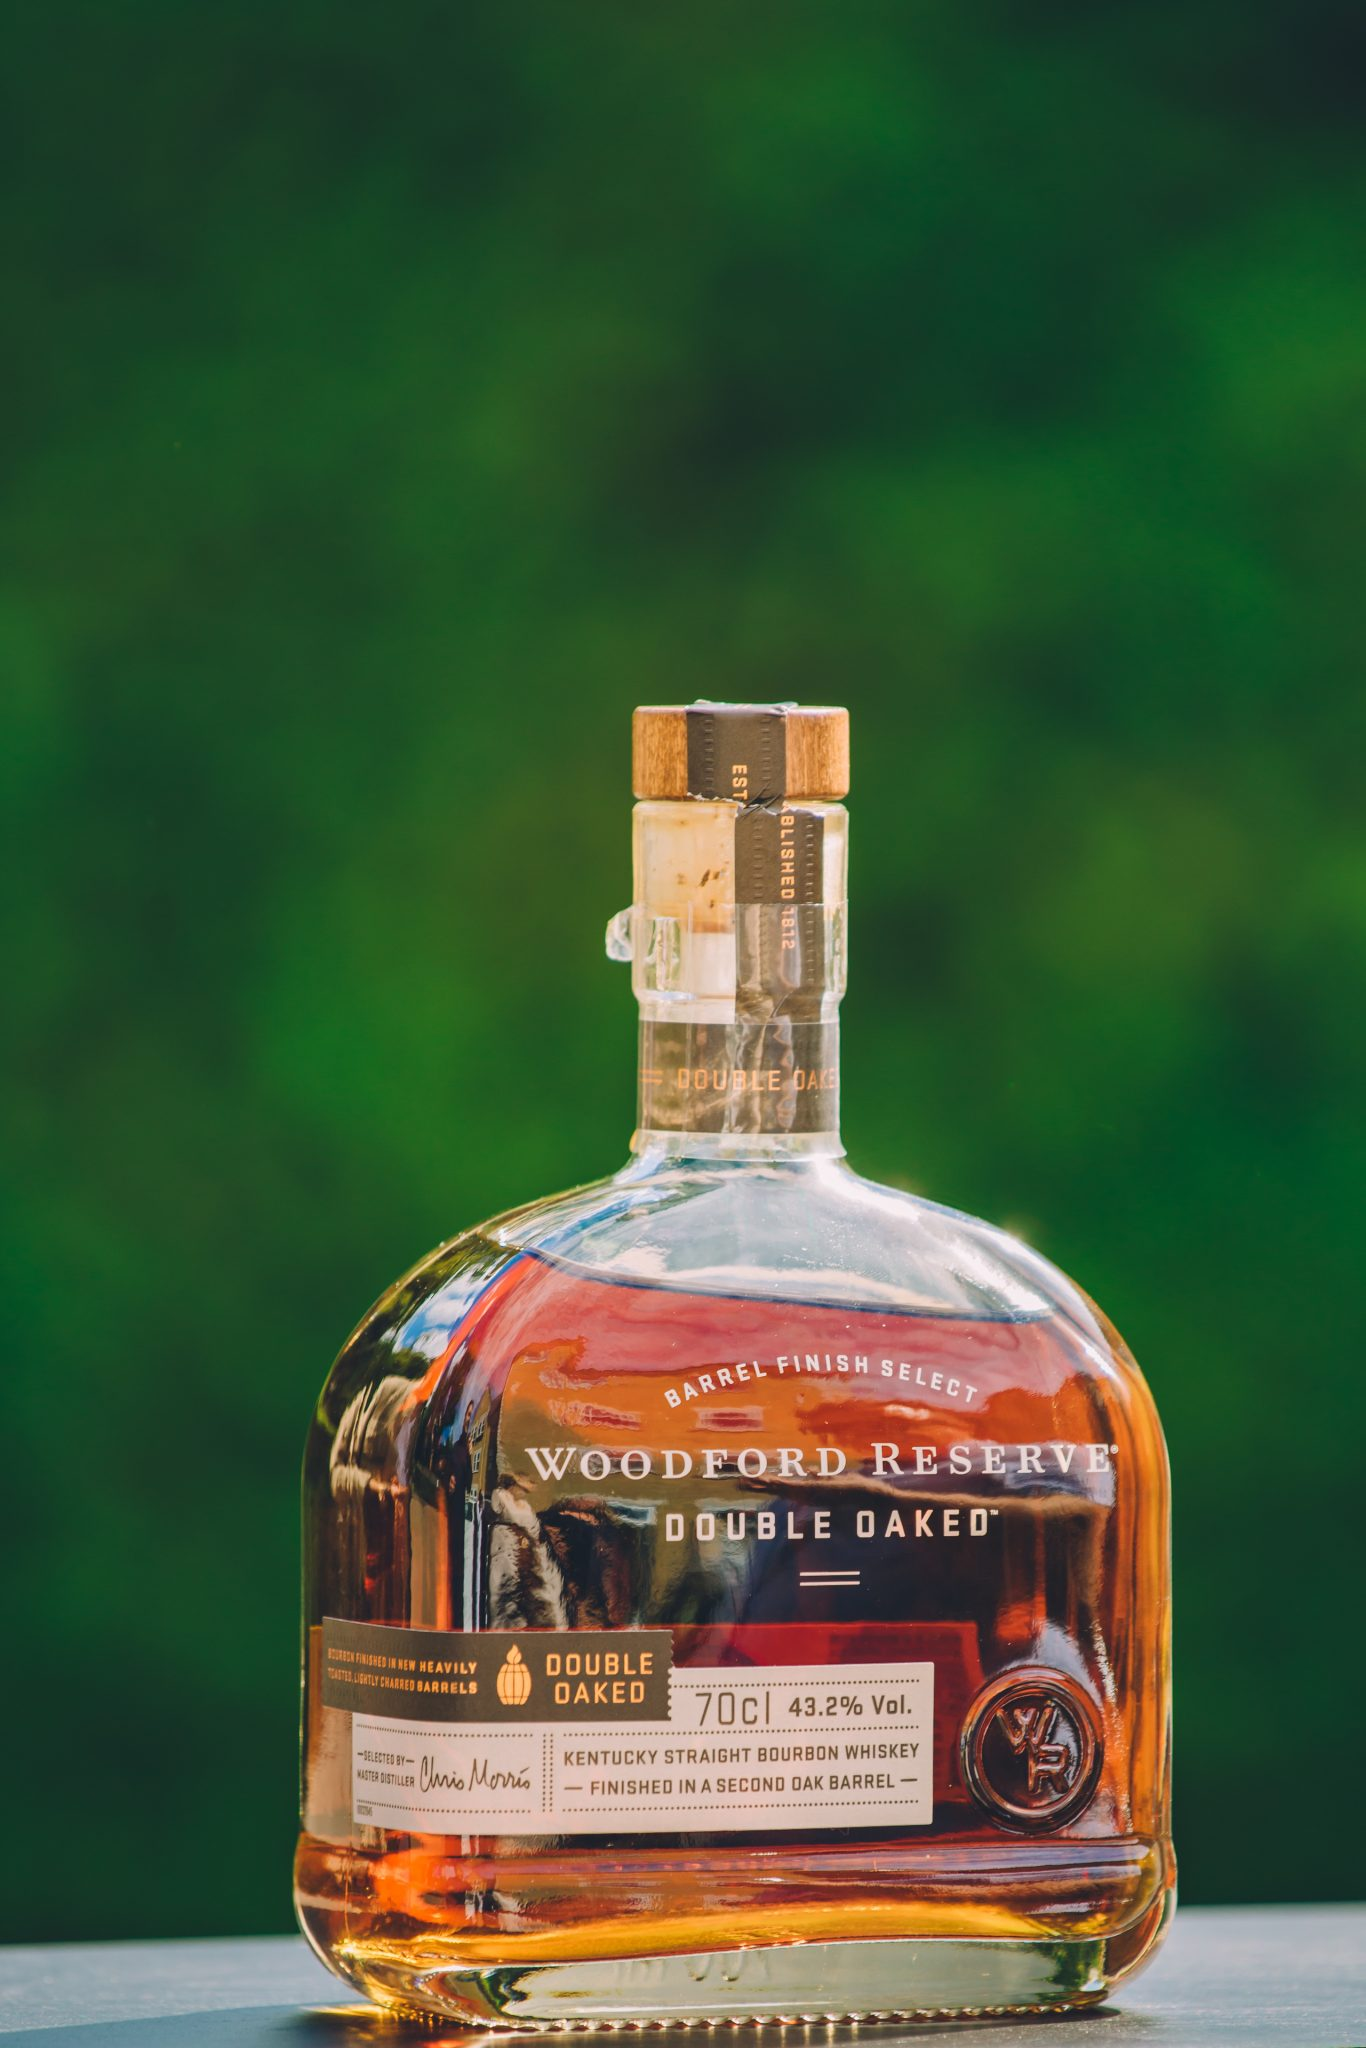 Commercial photo of a bottle of Woodford Reserve bourbon whiskey